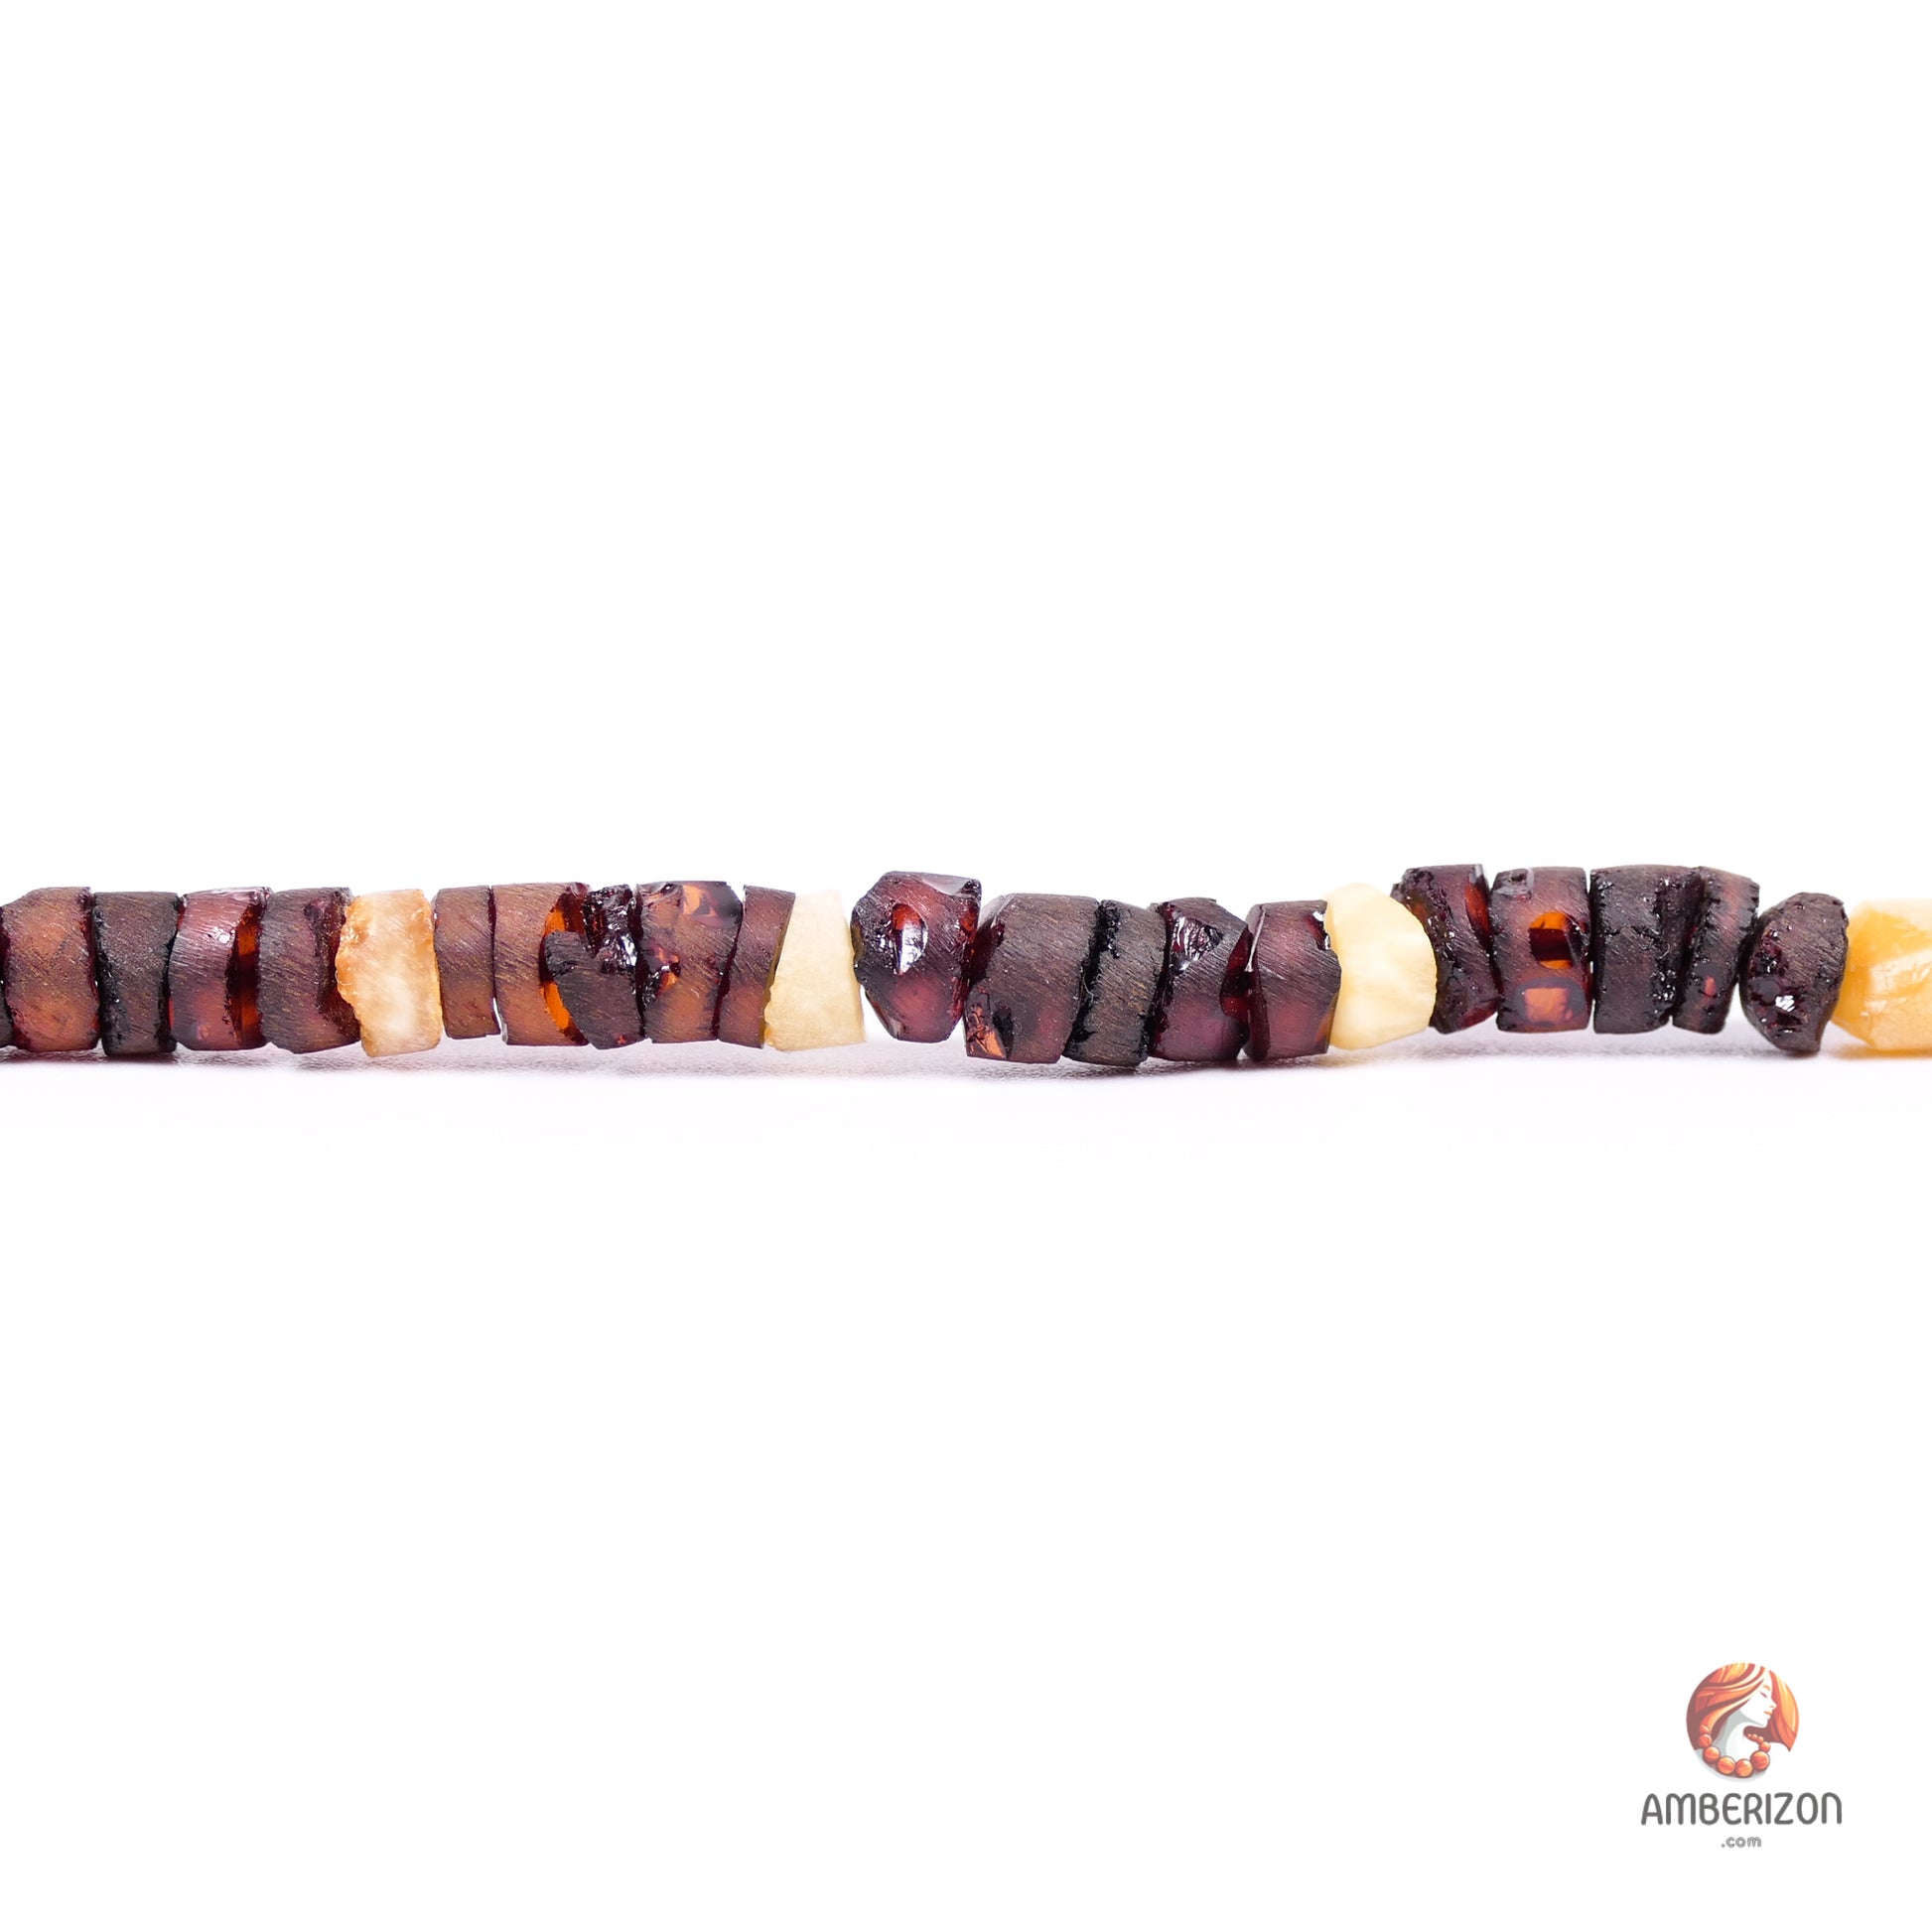 Adult Baltic amber necklace for woman, men, teenager - Raw amber beads - matte unpolished beads